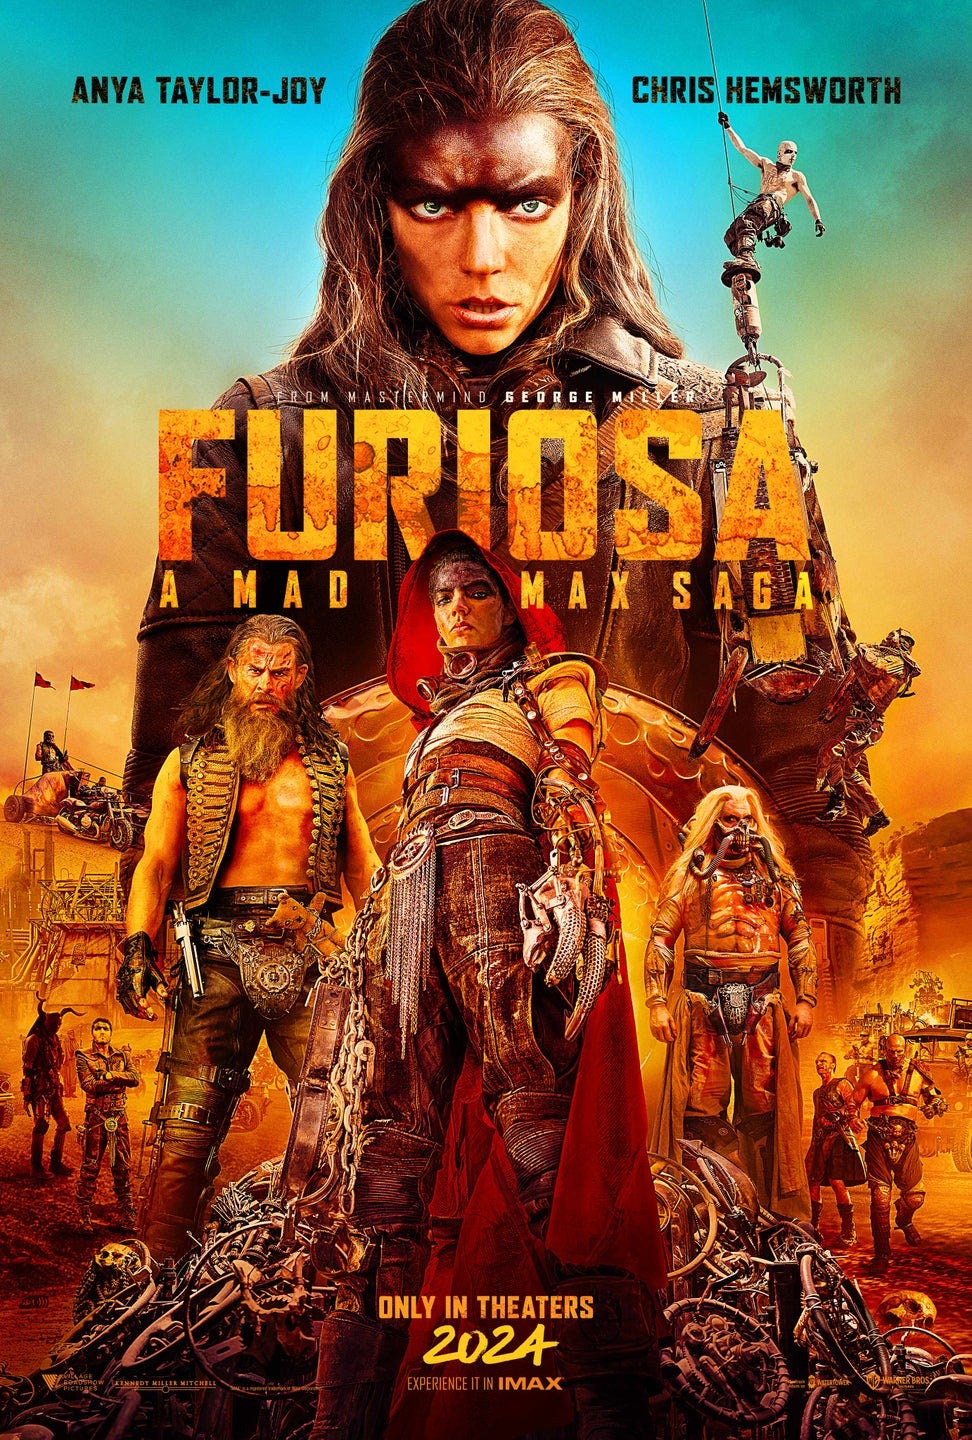 Poster for Mad Max Furiosa featuring all the main characters with a giant version of Anya Taylor-Joy